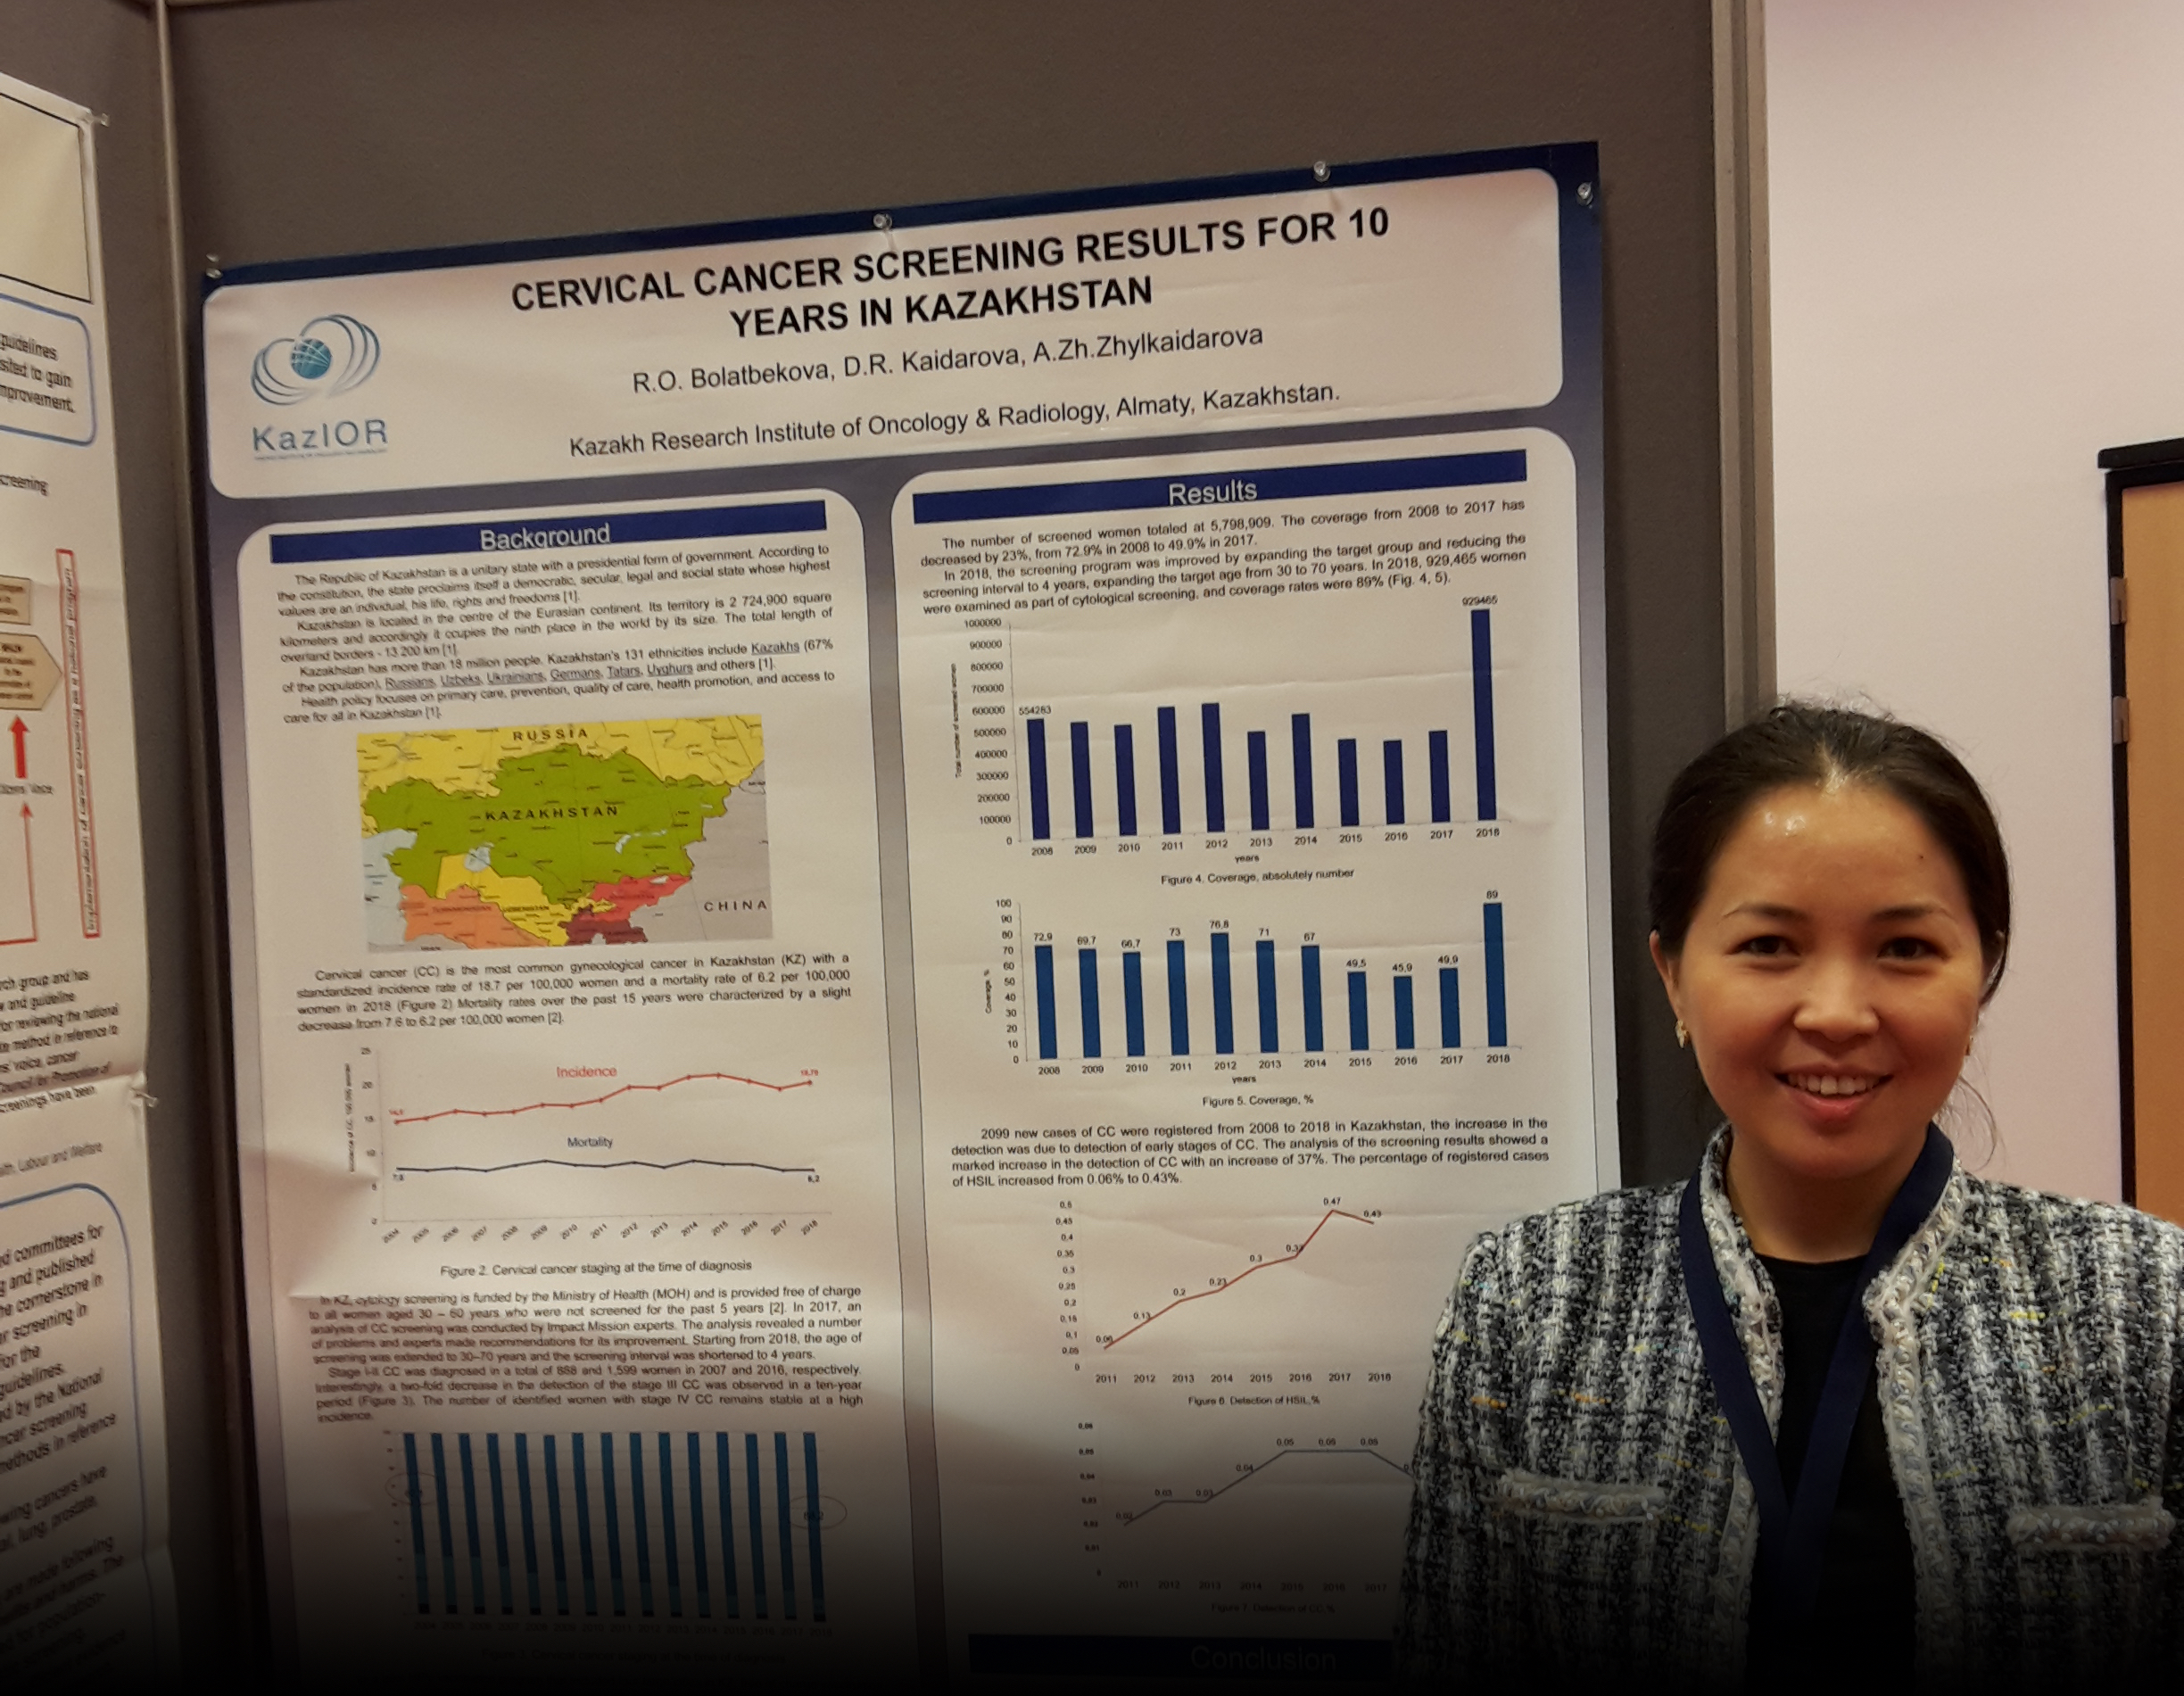  Kazakhstan cancer screening presentation at the ICSN Conference in the Netherlands, 2019 